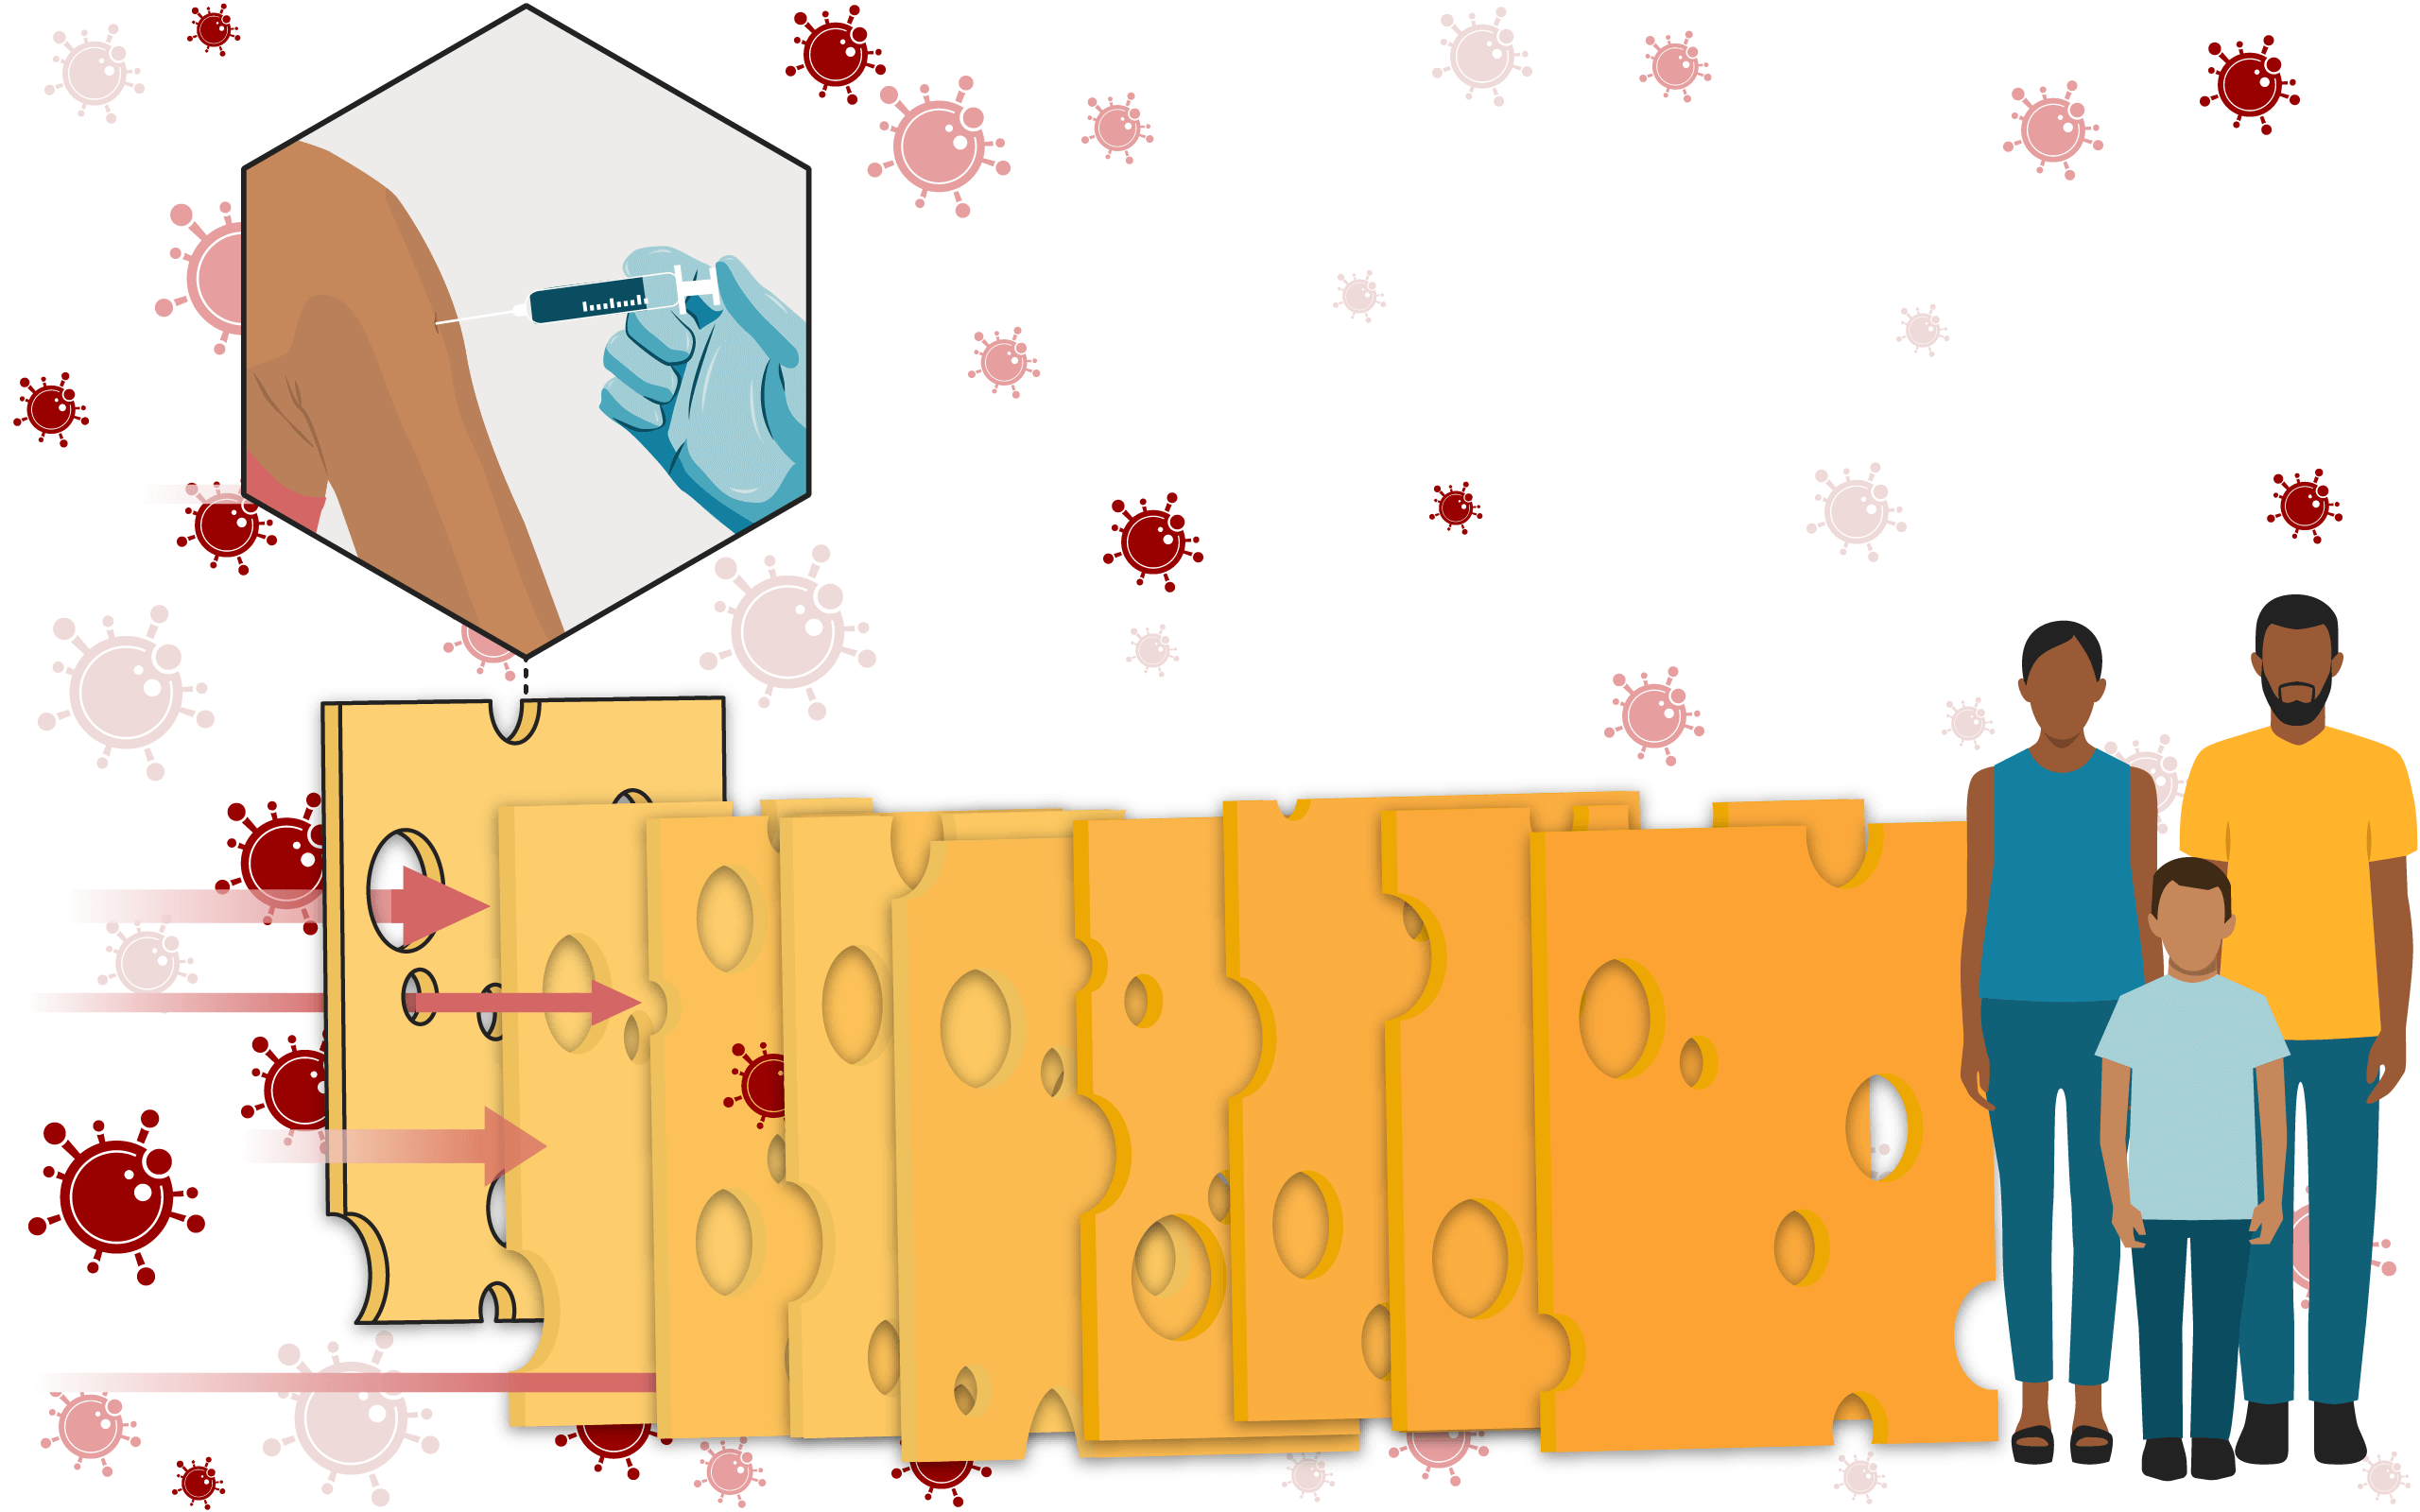 Illustration of a Swiss cheese, with a slice highlighted, representing vaccines